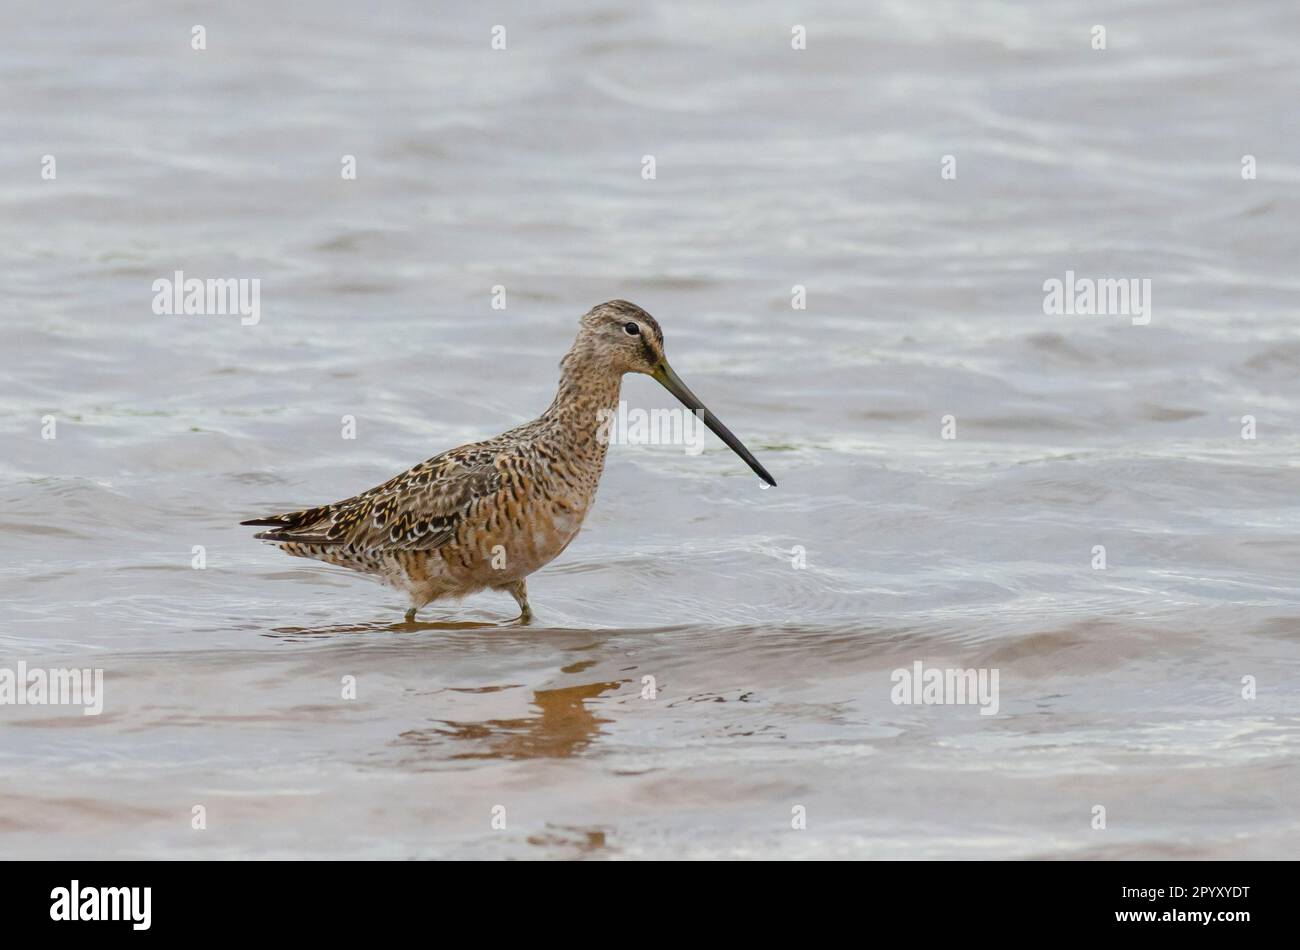 Long-billed Dowitcher, Limnodromus scolopaceus Stock Photo